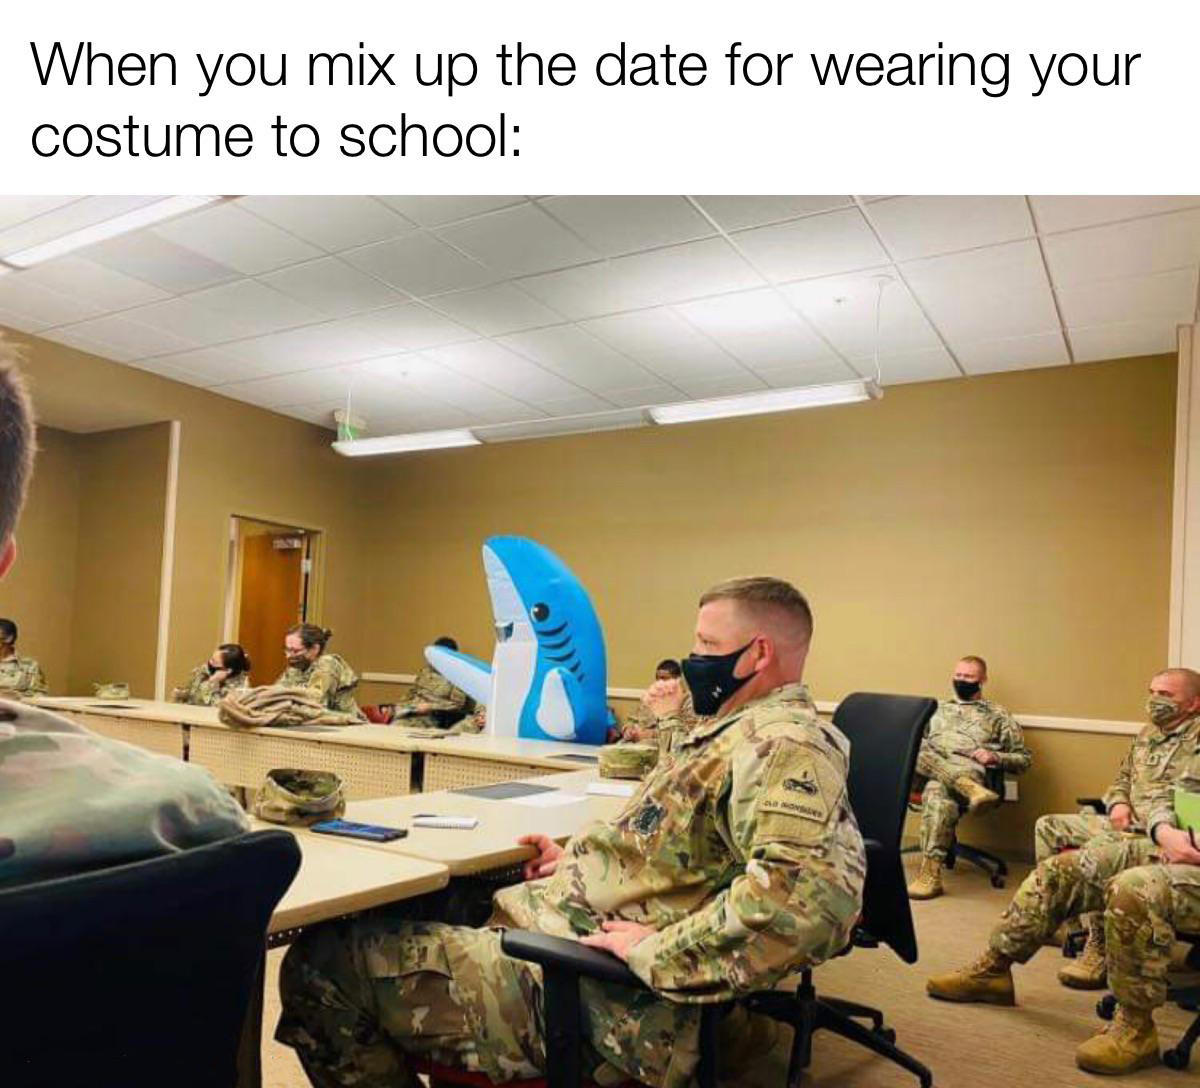 new world mmo meme - When you mix up the date for wearing your costume to school